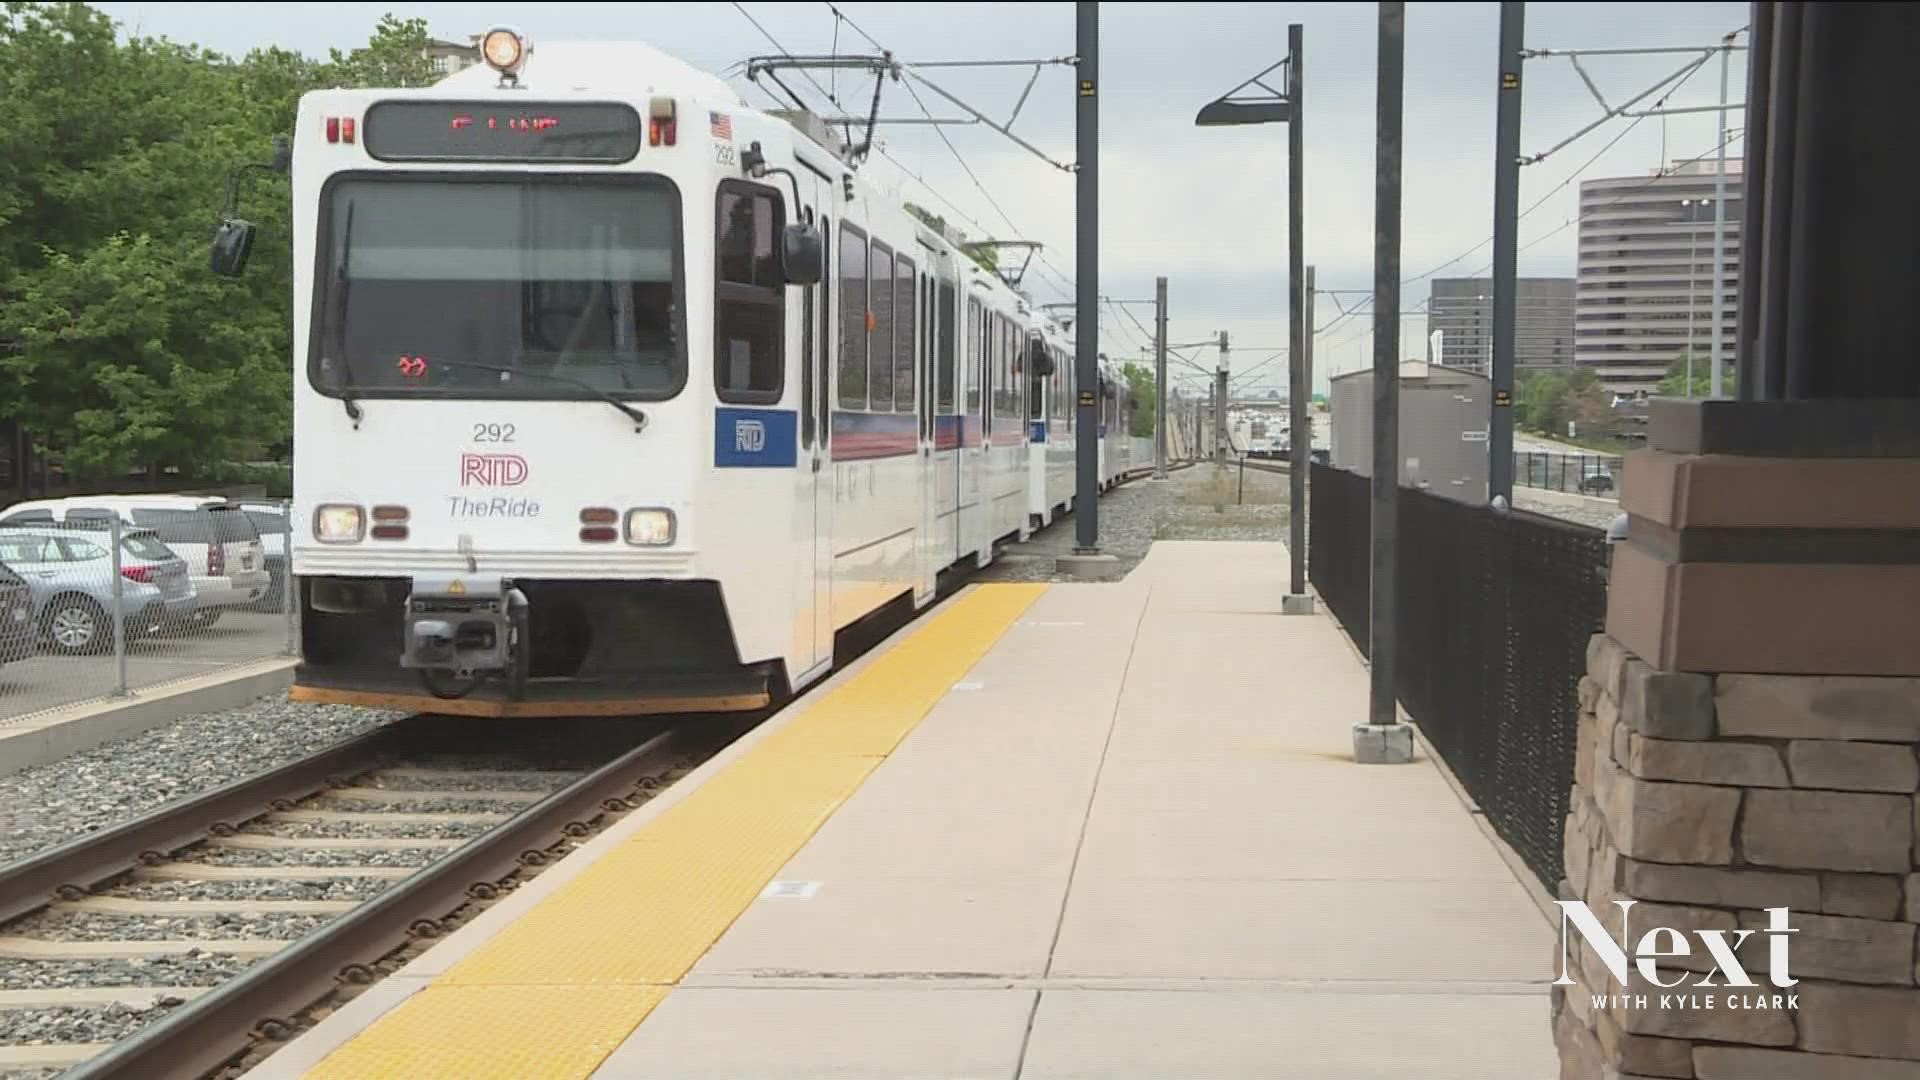 Gov. Jared Polis signed a bill that funnels money to Colorado transit agencies, allowing them to offer fare free days in summer when ozone issues impact air quality.